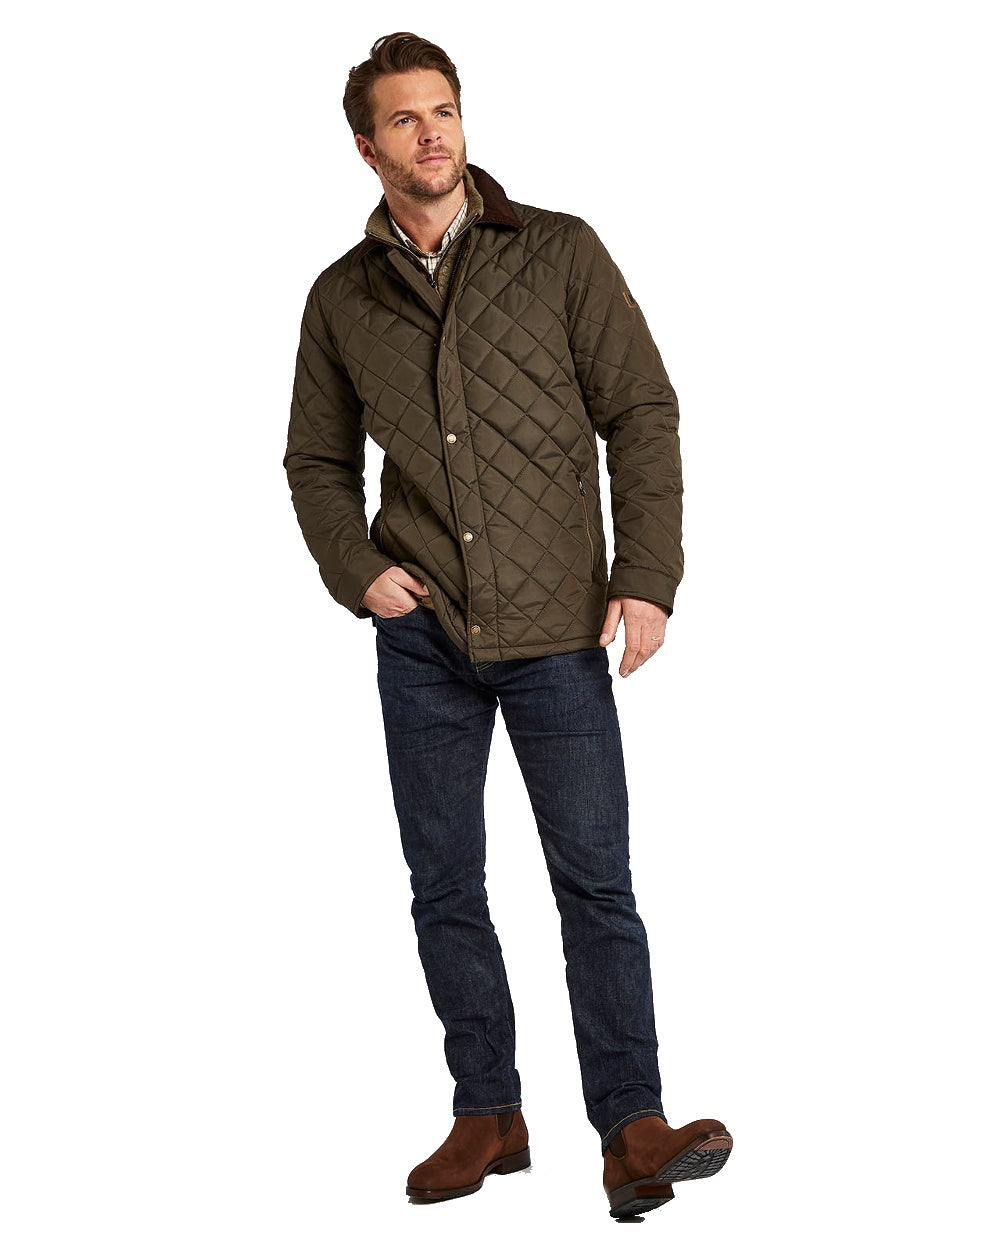 Dubarry Mountusher Quilted Jacket in Olive 